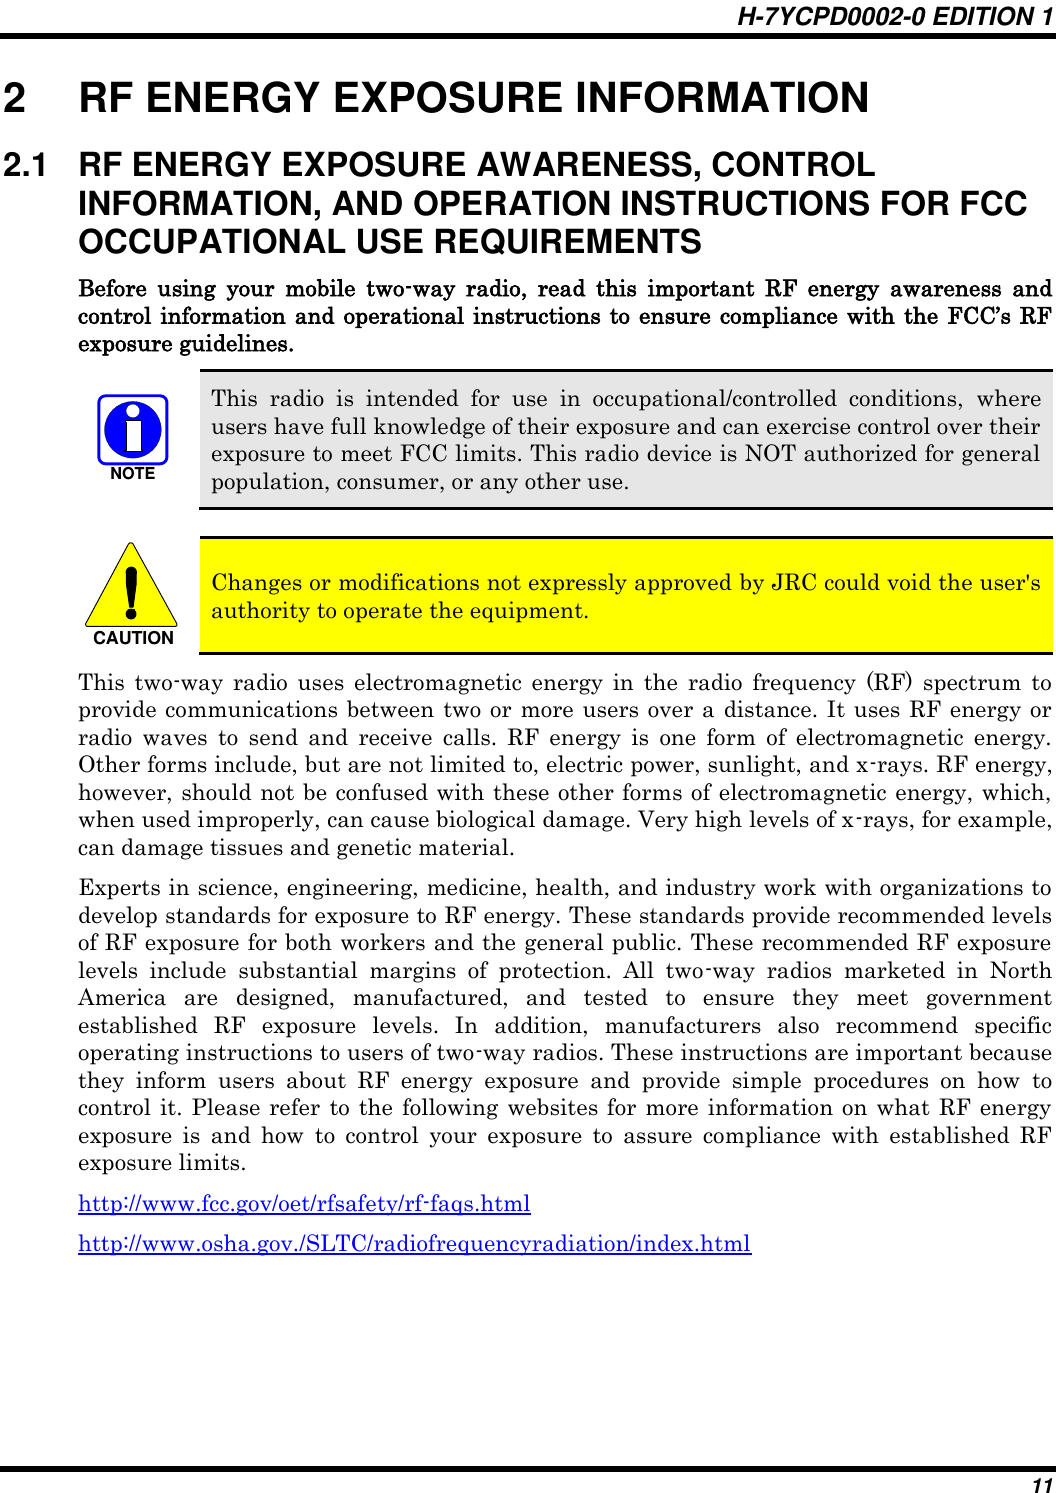 H-7YCPD0002-0 EDITION 1 11 2  RF ENERGY EXPOSURE INFORMATION 2.1  RF ENERGY EXPOSURE AWARENESS, CONTROL INFORMATION, AND OPERATION INSTRUCTIONS FOR FCC OCCUPATIONAL USE REQUIREMENTS Before  using  your  mobile  two-way  radio,  read  this  important  RF  energy  awareness  and control information and operational instructions to ensure compliance with the FCC‟s RF exposure guidelines. NOTE This  radio  is  intended  for  use  in  occupational/controlled  conditions,  where users have full knowledge of their exposure and can exercise control over their exposure to meet FCC limits. This radio device is NOT authorized for general population, consumer, or any other use.  CAUTION Changes or modifications not expressly approved by JRC could void the user&apos;s authority to operate the equipment. This  two-way  radio  uses  electromagnetic  energy  in  the  radio  frequency  (RF)  spectrum  to provide communications between two or more users over a distance. It uses RF energy or radio  waves  to  send  and  receive  calls.  RF  energy  is  one  form  of  electromagnetic  energy. Other forms include, but are not limited to, electric power, sunlight, and x-rays. RF energy, however, should not be confused with these other forms of electromagnetic energy, which, when used improperly, can cause biological damage. Very high levels of x-rays, for example, can damage tissues and genetic material. Experts in science, engineering, medicine, health, and industry work with organizations to develop standards for exposure to RF energy. These standards provide recommended levels of RF exposure for both workers and the general public. These recommended RF exposure levels  include  substantial  margins  of  protection.  All  two-way  radios  marketed  in  North America  are  designed,  manufactured,  and  tested  to  ensure  they  meet  government established  RF  exposure  levels.  In  addition,  manufacturers  also  recommend  specific operating instructions to users of two-way radios. These instructions are important because they  inform  users  about  RF  energy  exposure  and  provide  simple  procedures  on  how  to control it. Please refer  to the following  websites for more information  on what RF energy exposure  is  and  how  to  control  your  exposure  to  assure  compliance  with  established  RF exposure limits. http://www.fcc.gov/oet/rfsafety/rf-faqs.html http://www.osha.gov./SLTC/radiofrequencyradiation/index.html  